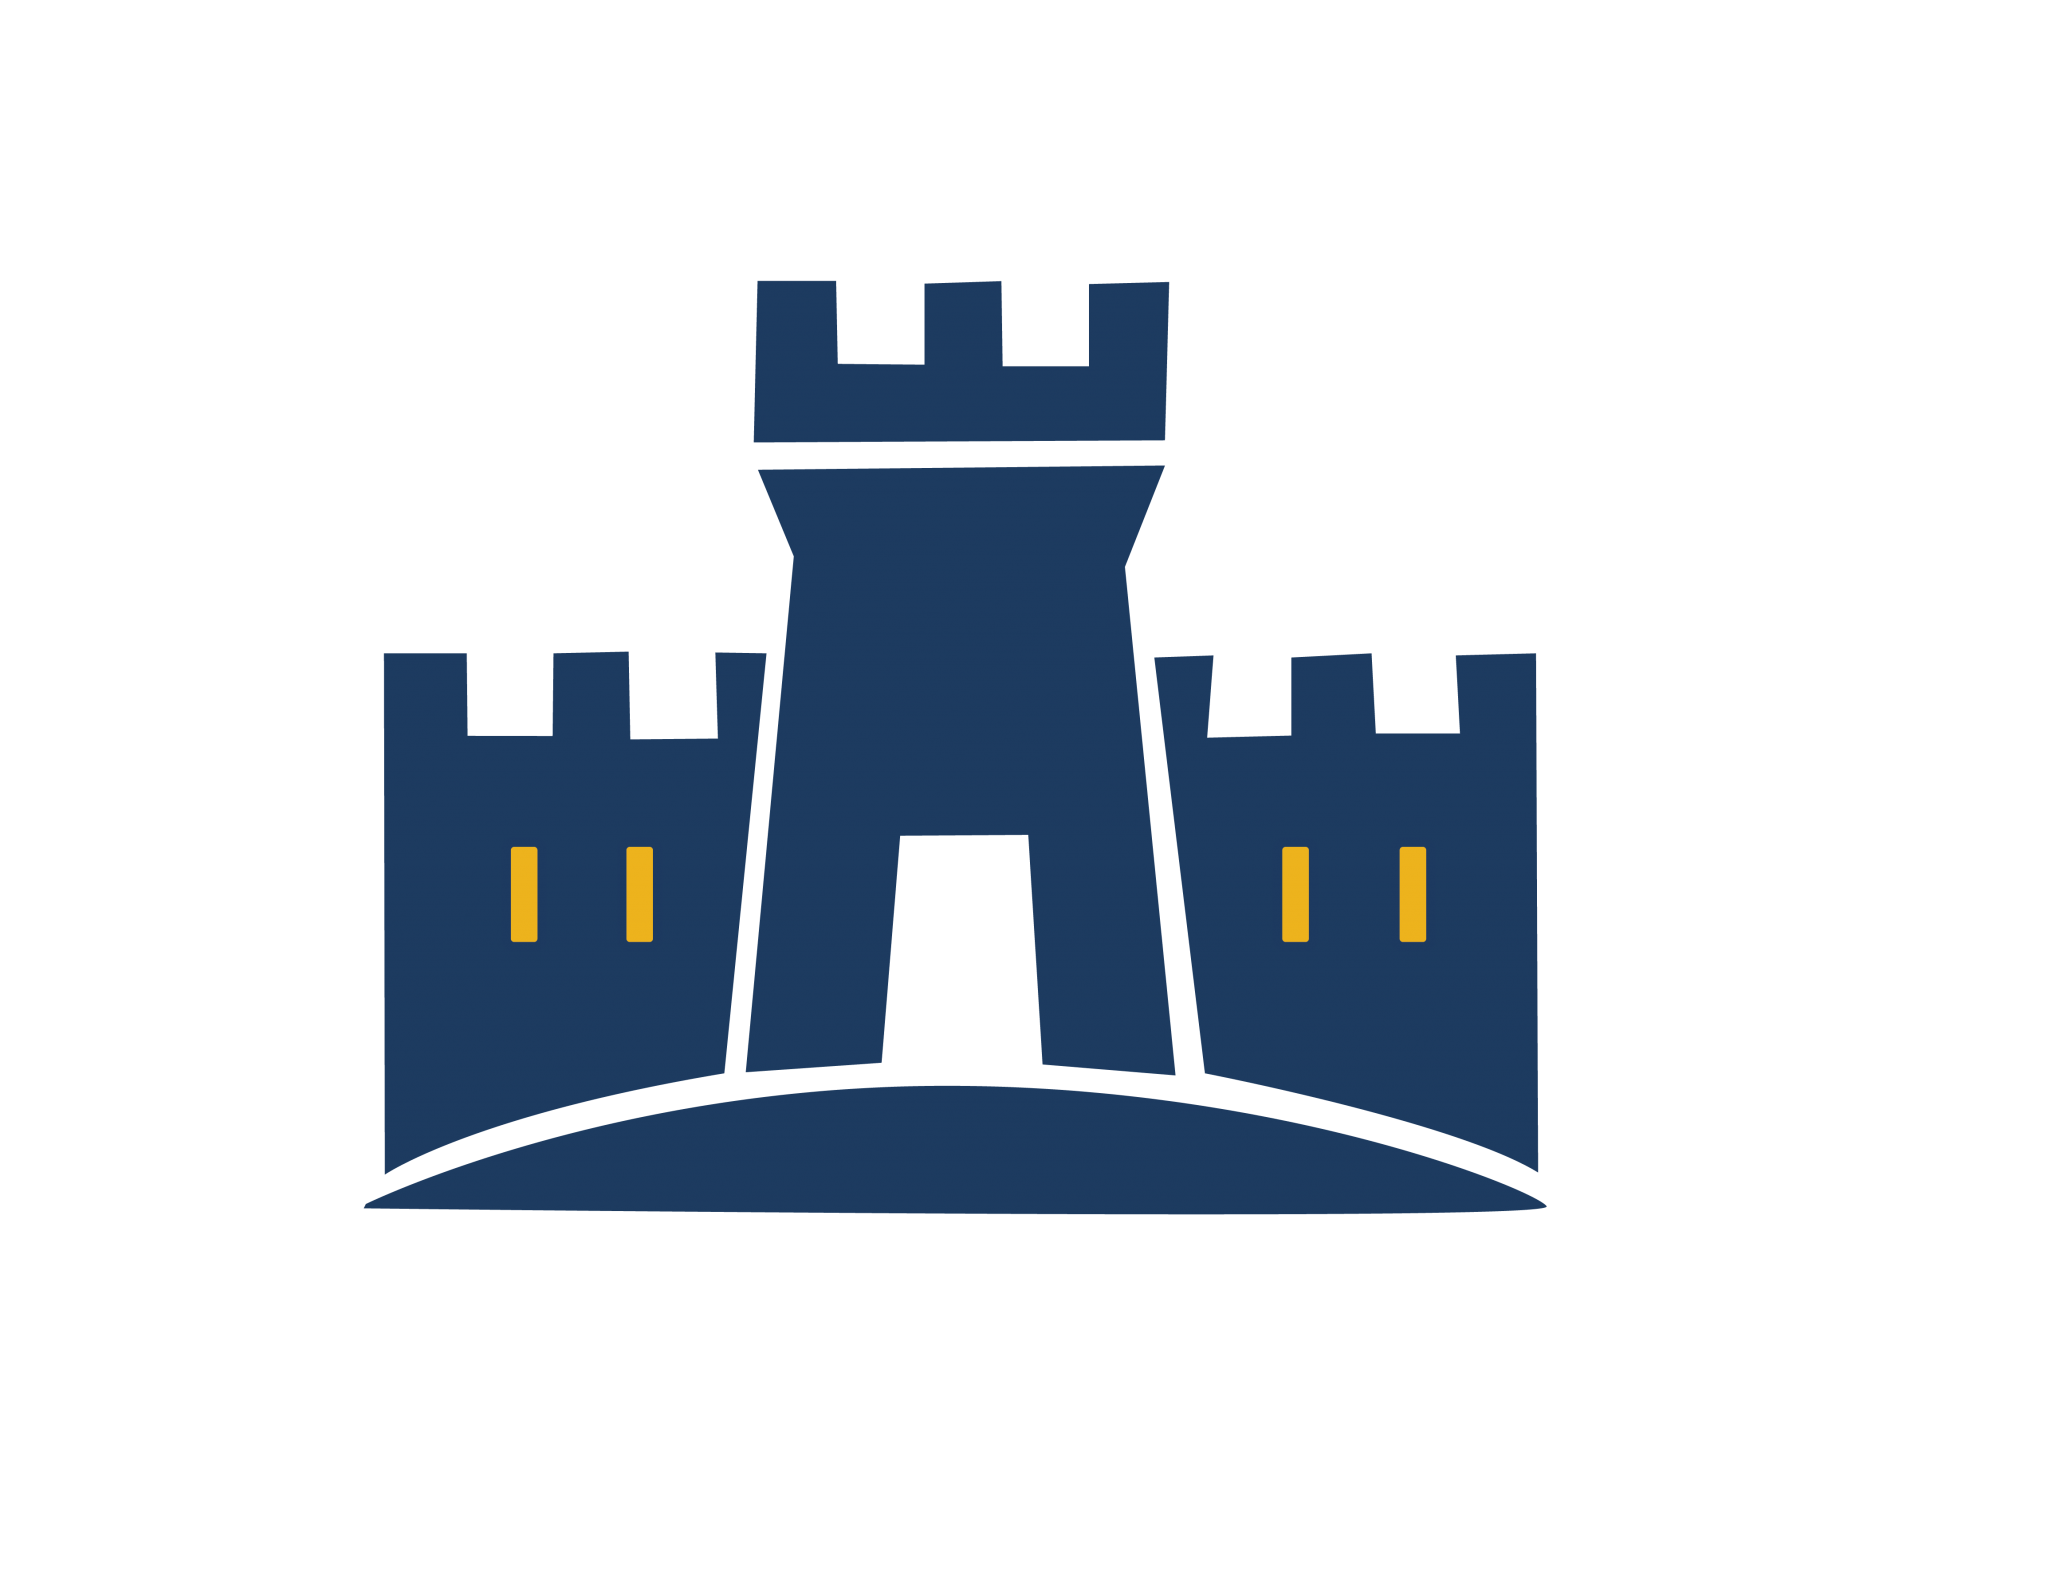 Bader college castle icon